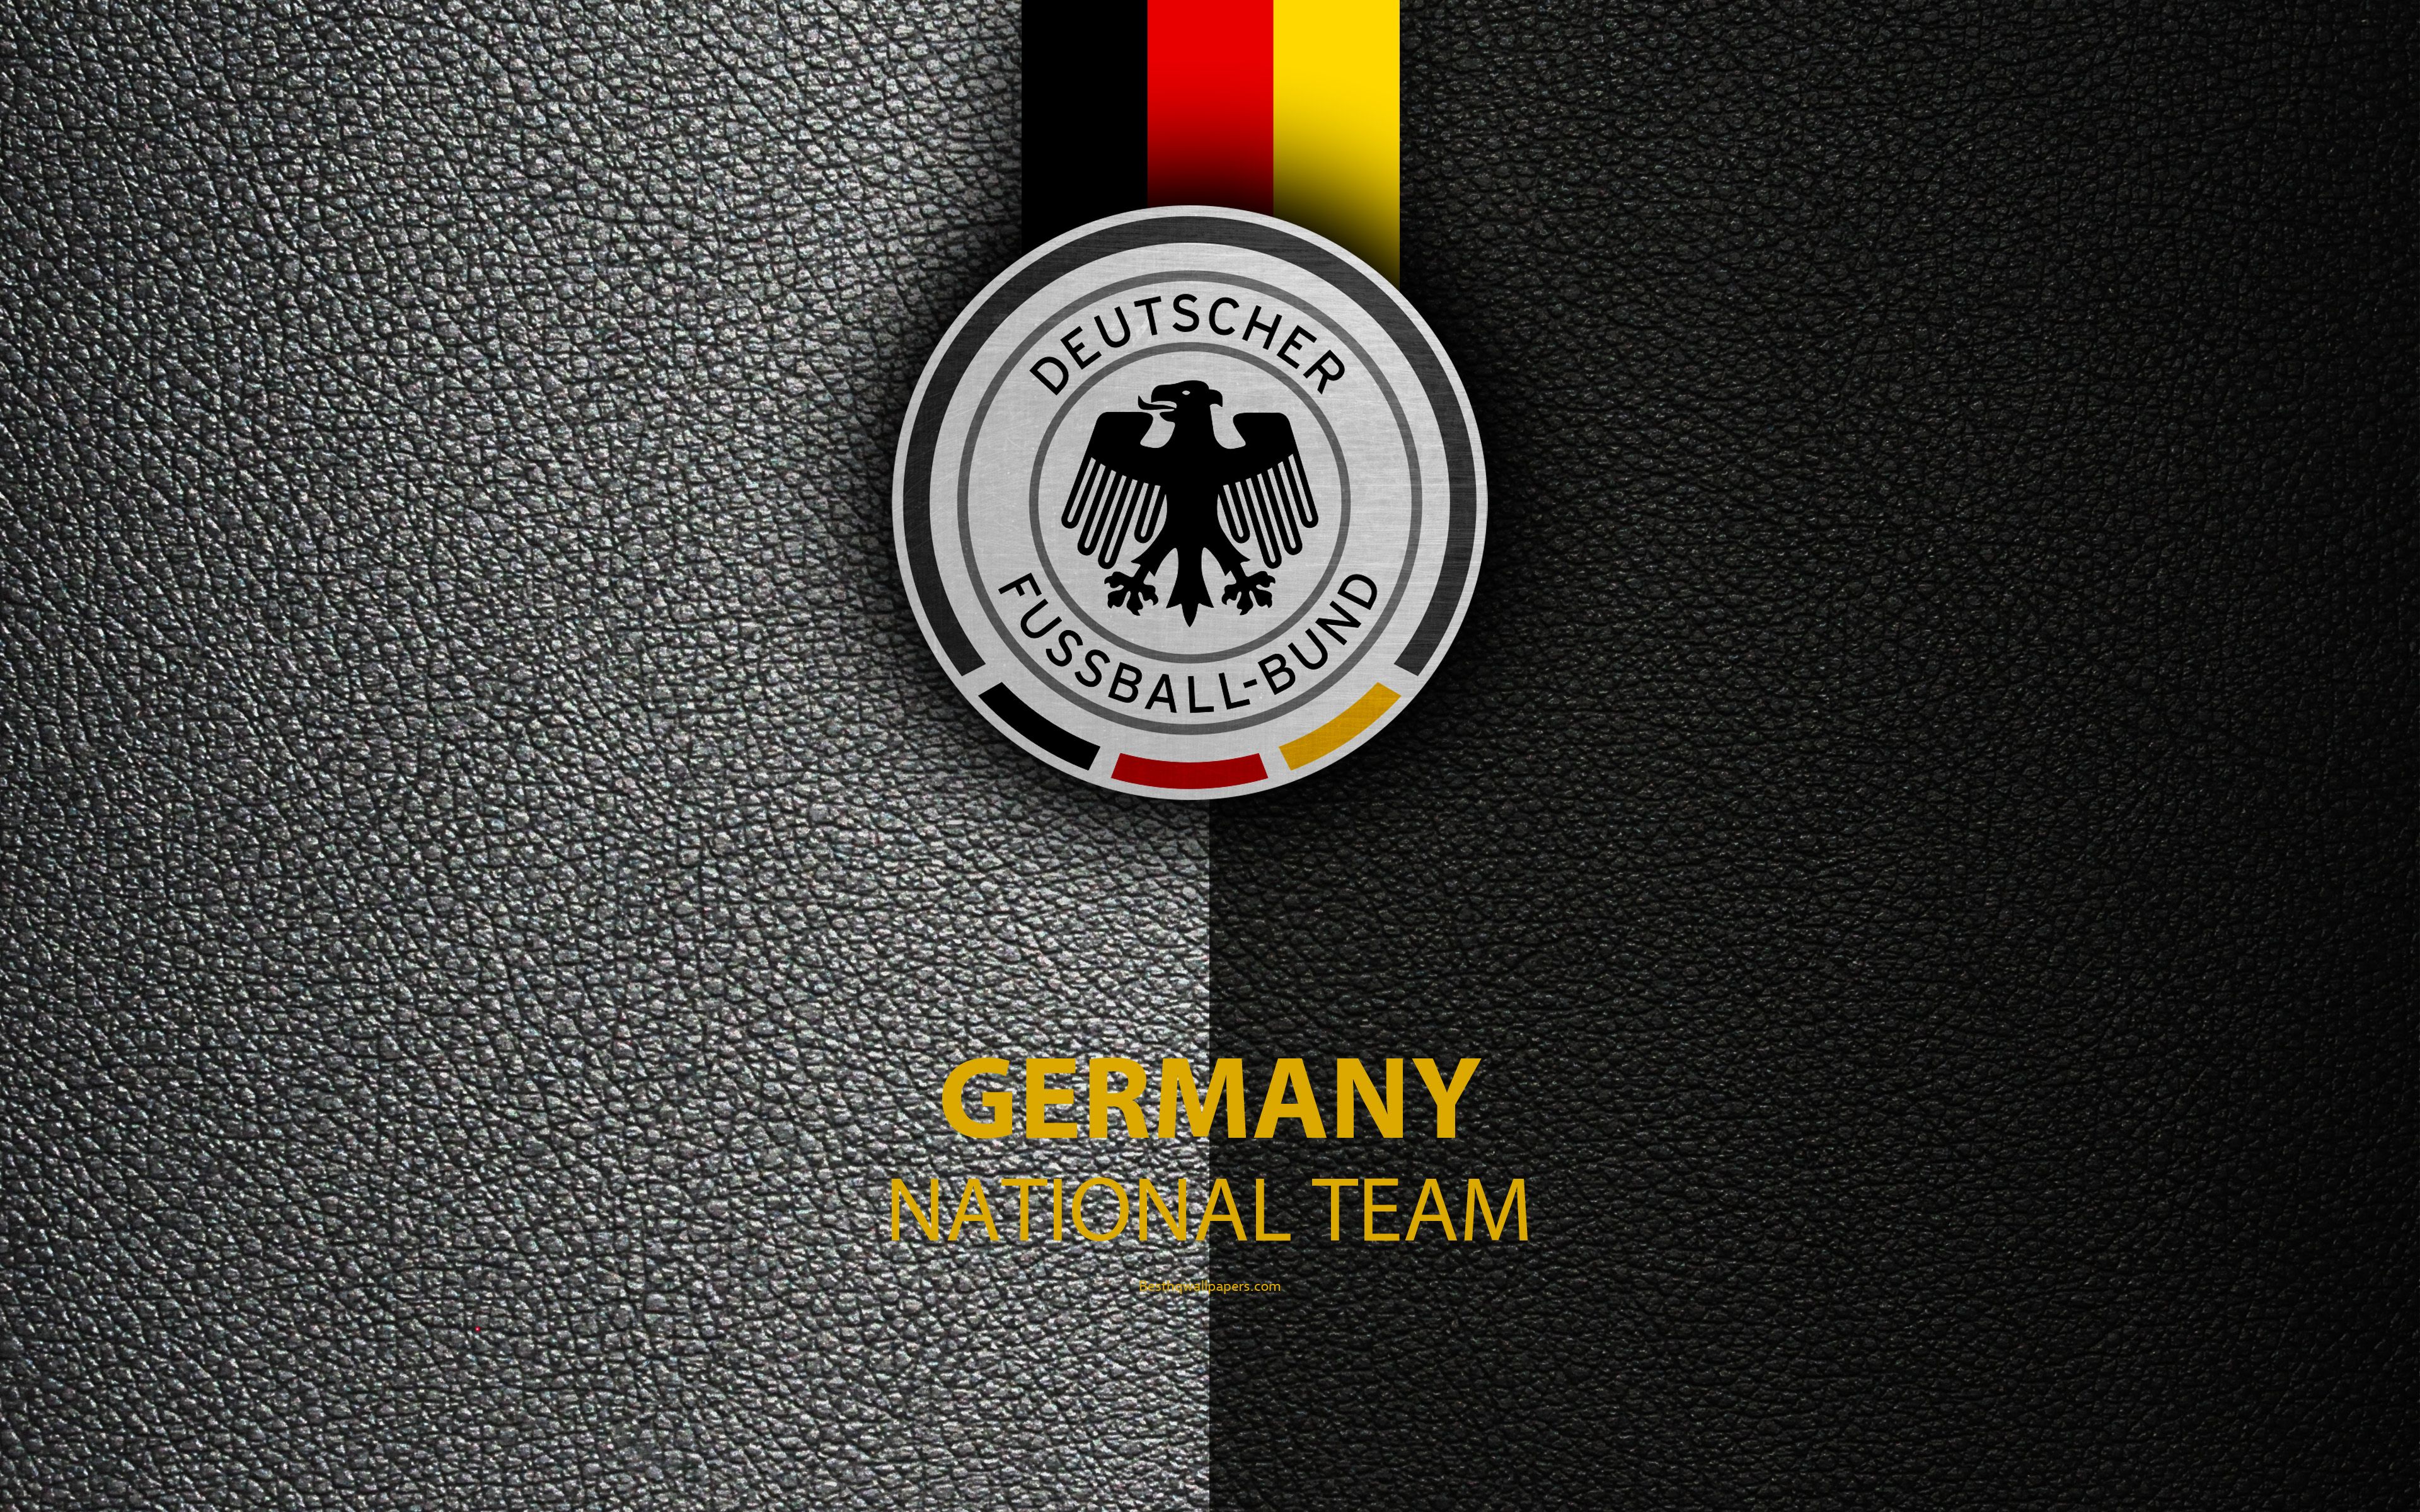 Download wallpaper Germany national football team, 4k, leather texture, emblem, logo, football, Germany, Europe for desktop with resolution 3840x2400. High Quality HD picture wallpaper